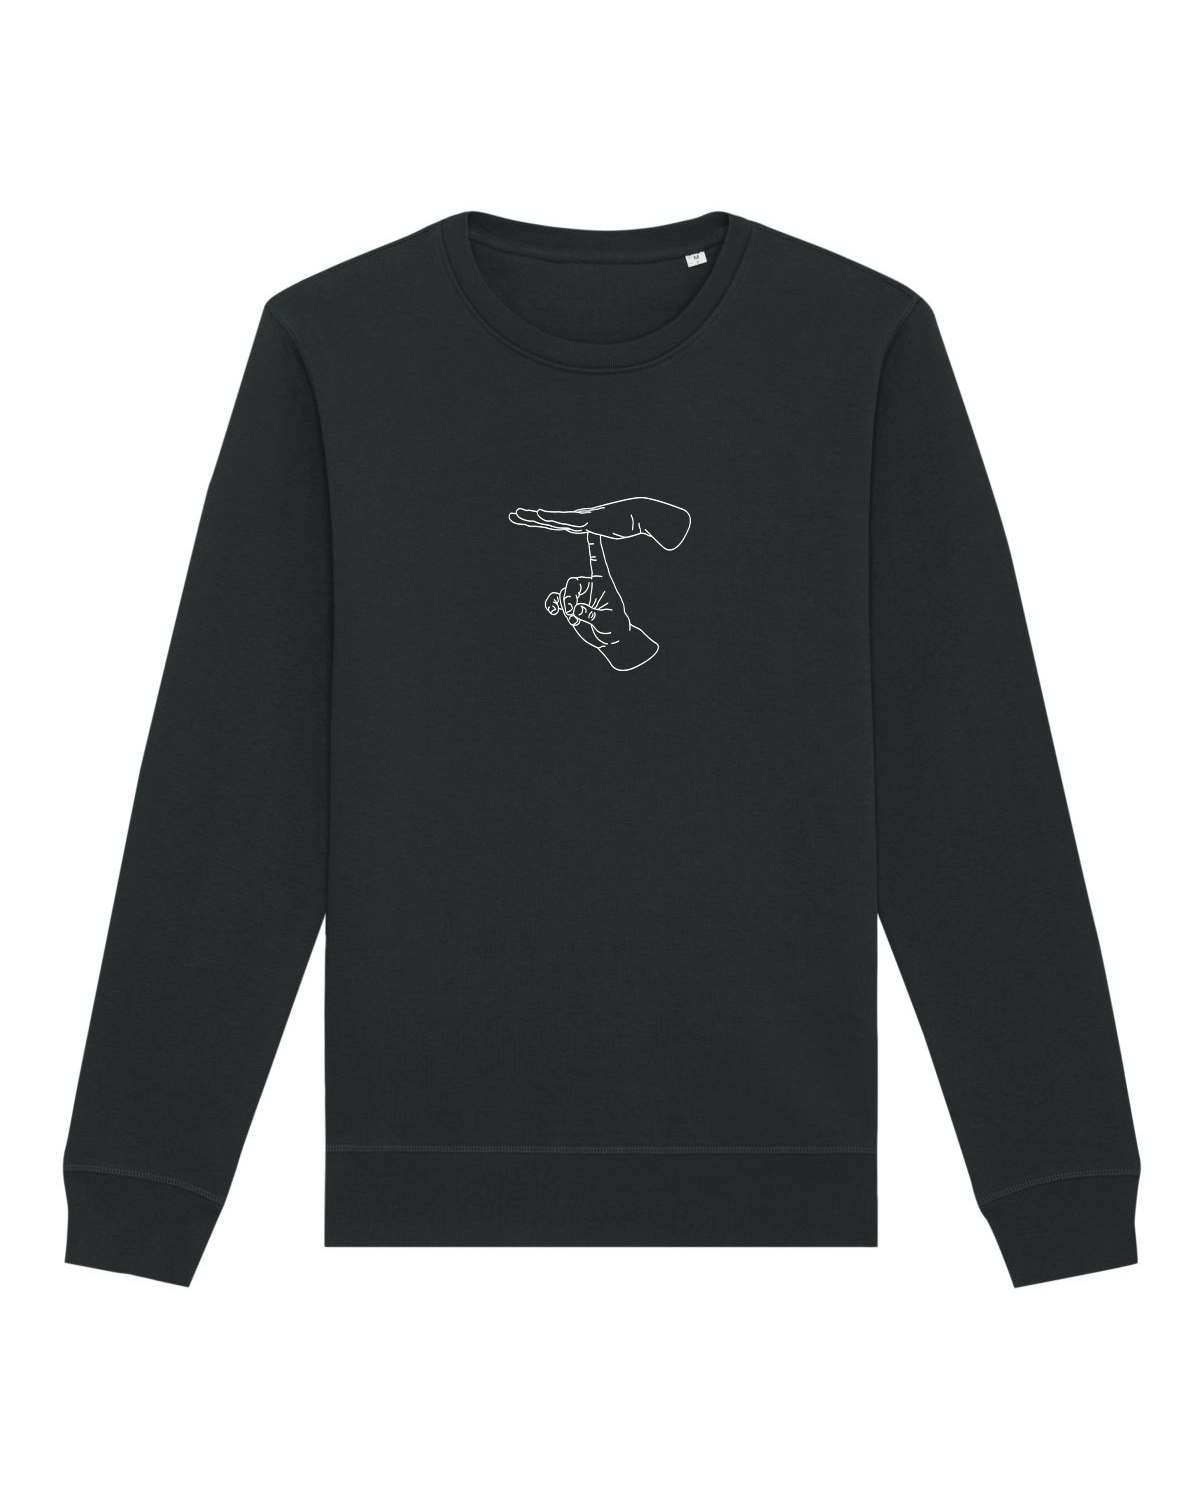 TIME OUT | SWEATSHIRT